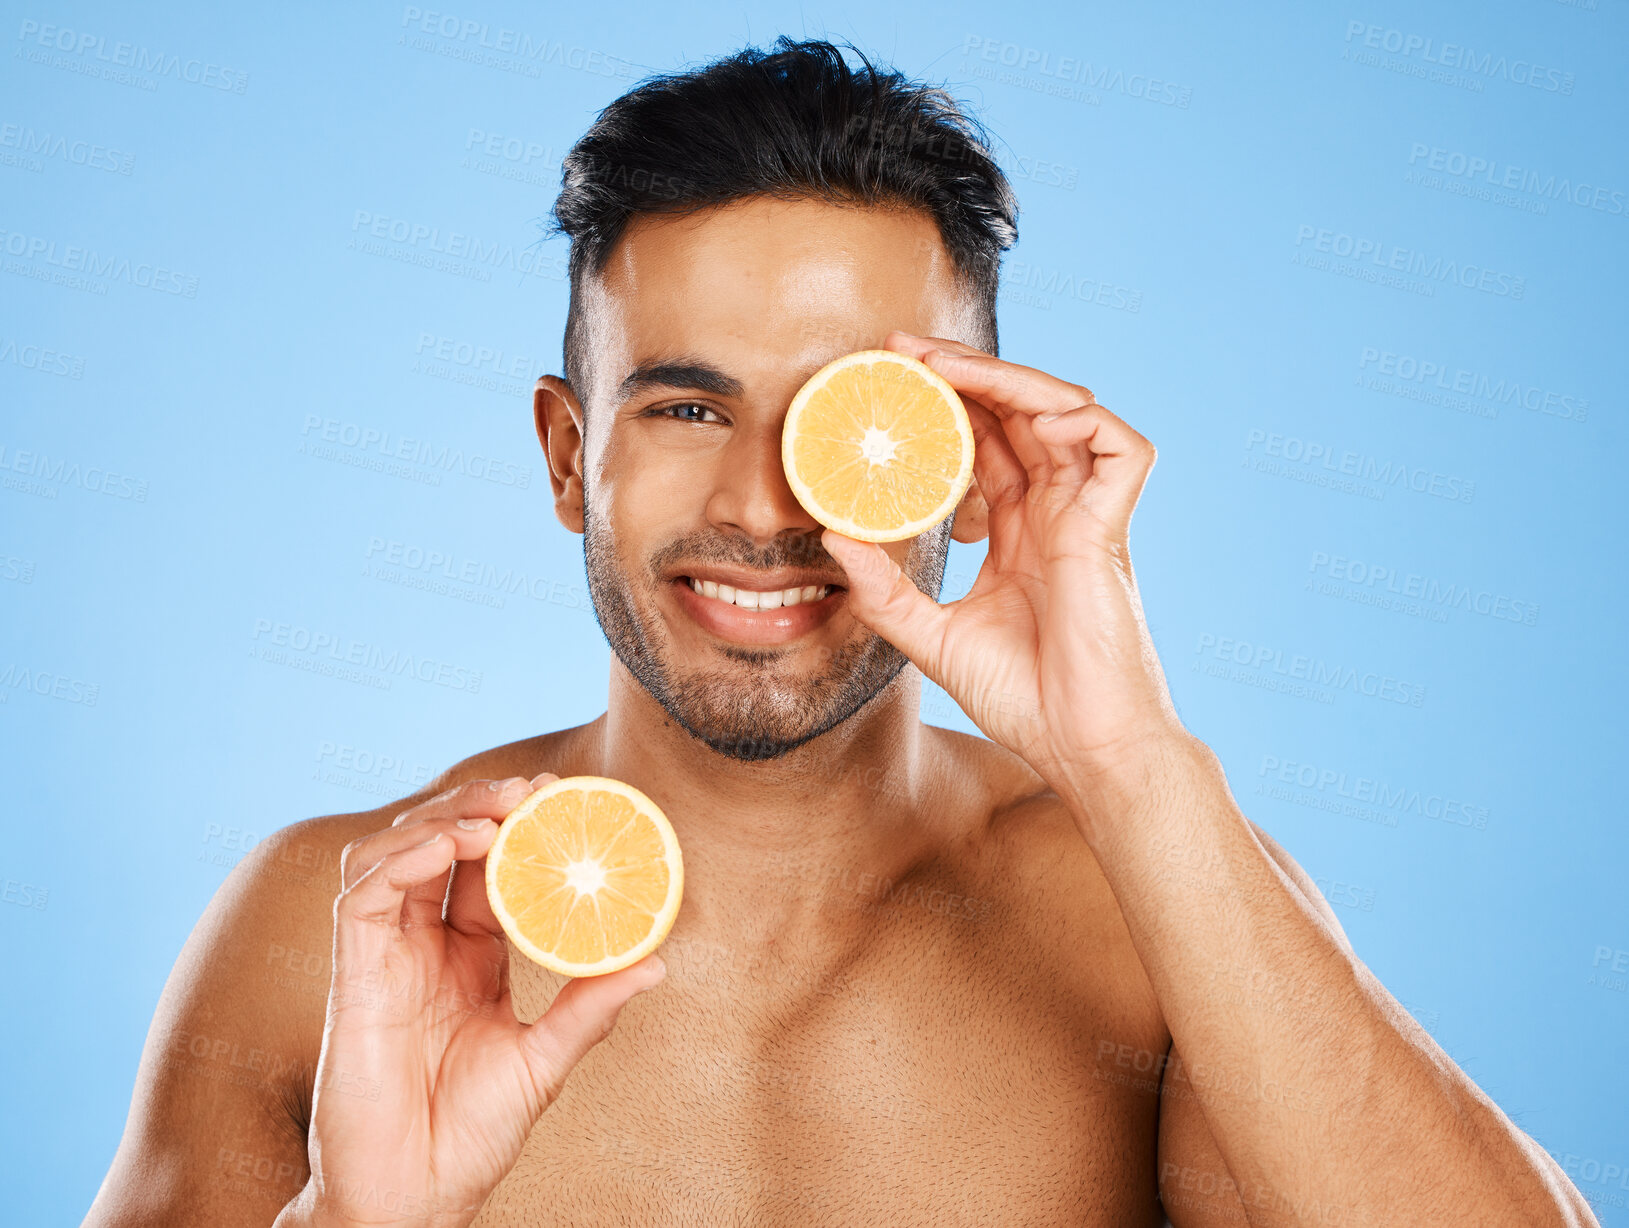 Buy stock photo Vitamin C, lemon and male skincare portrait for healthy, glowing face skin on studio background. Health, wellness and citrus treatment for smooth and natural skin care on a blue backdrop